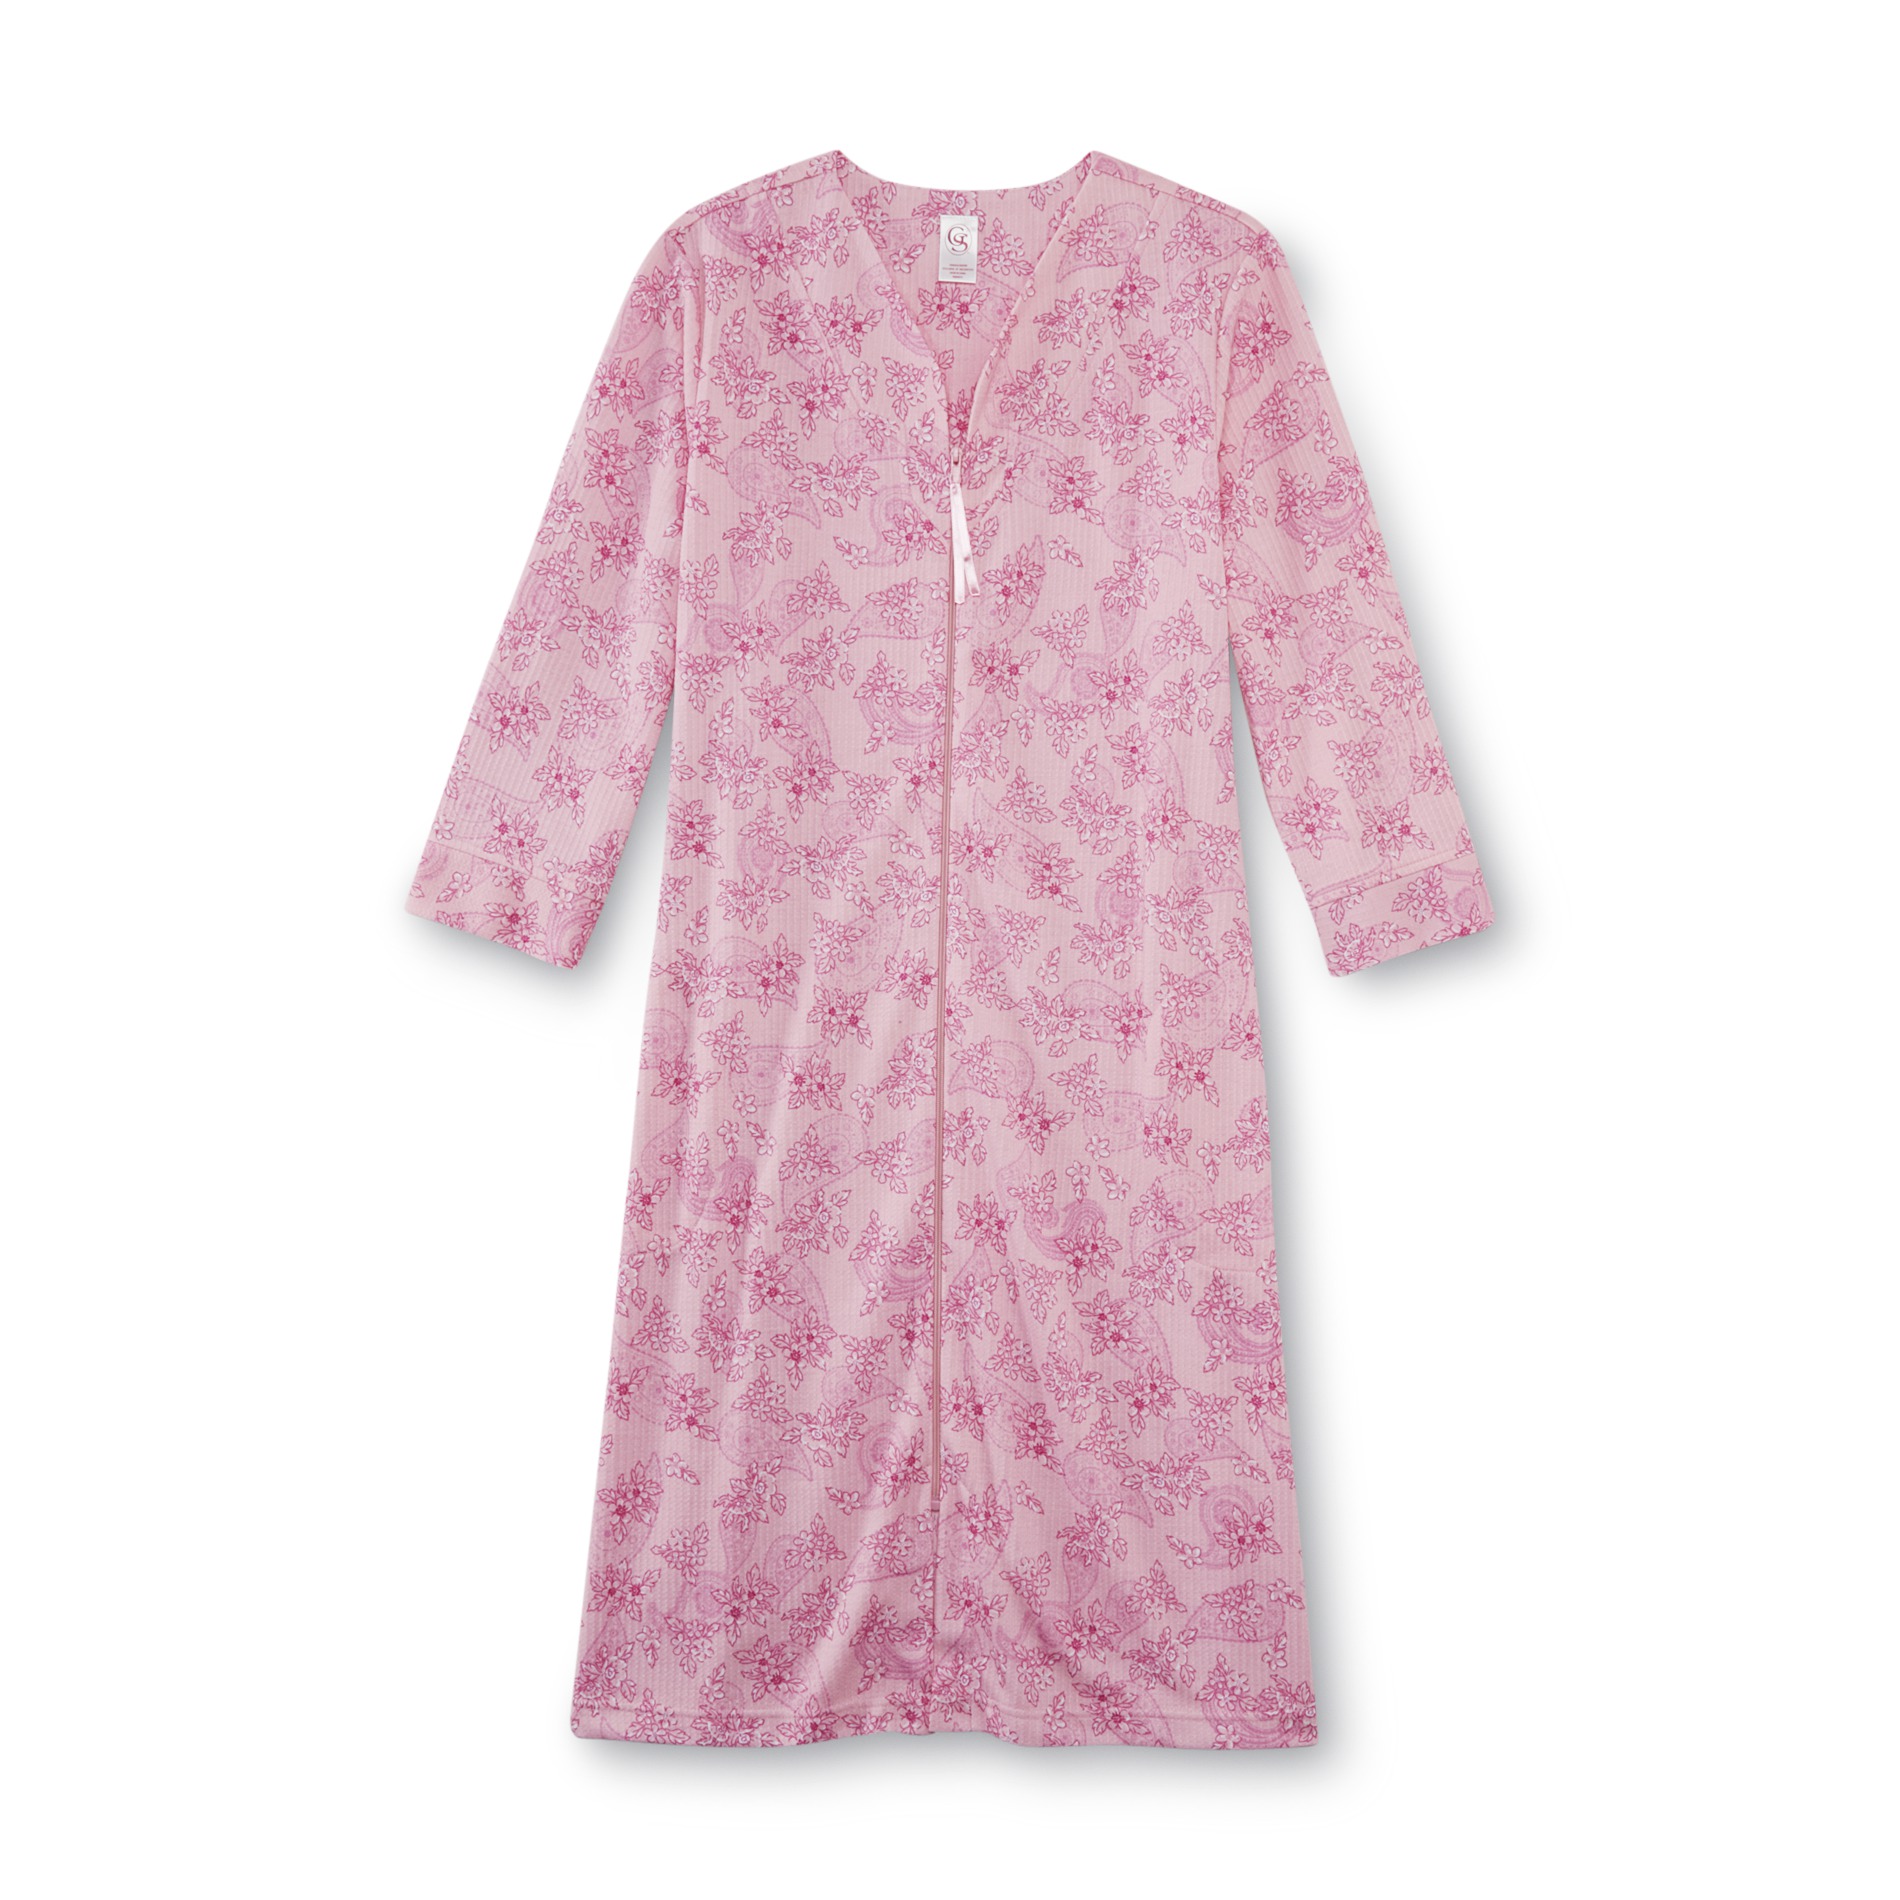 Granada Women's Knit Duster Robe - Floral & Paisley